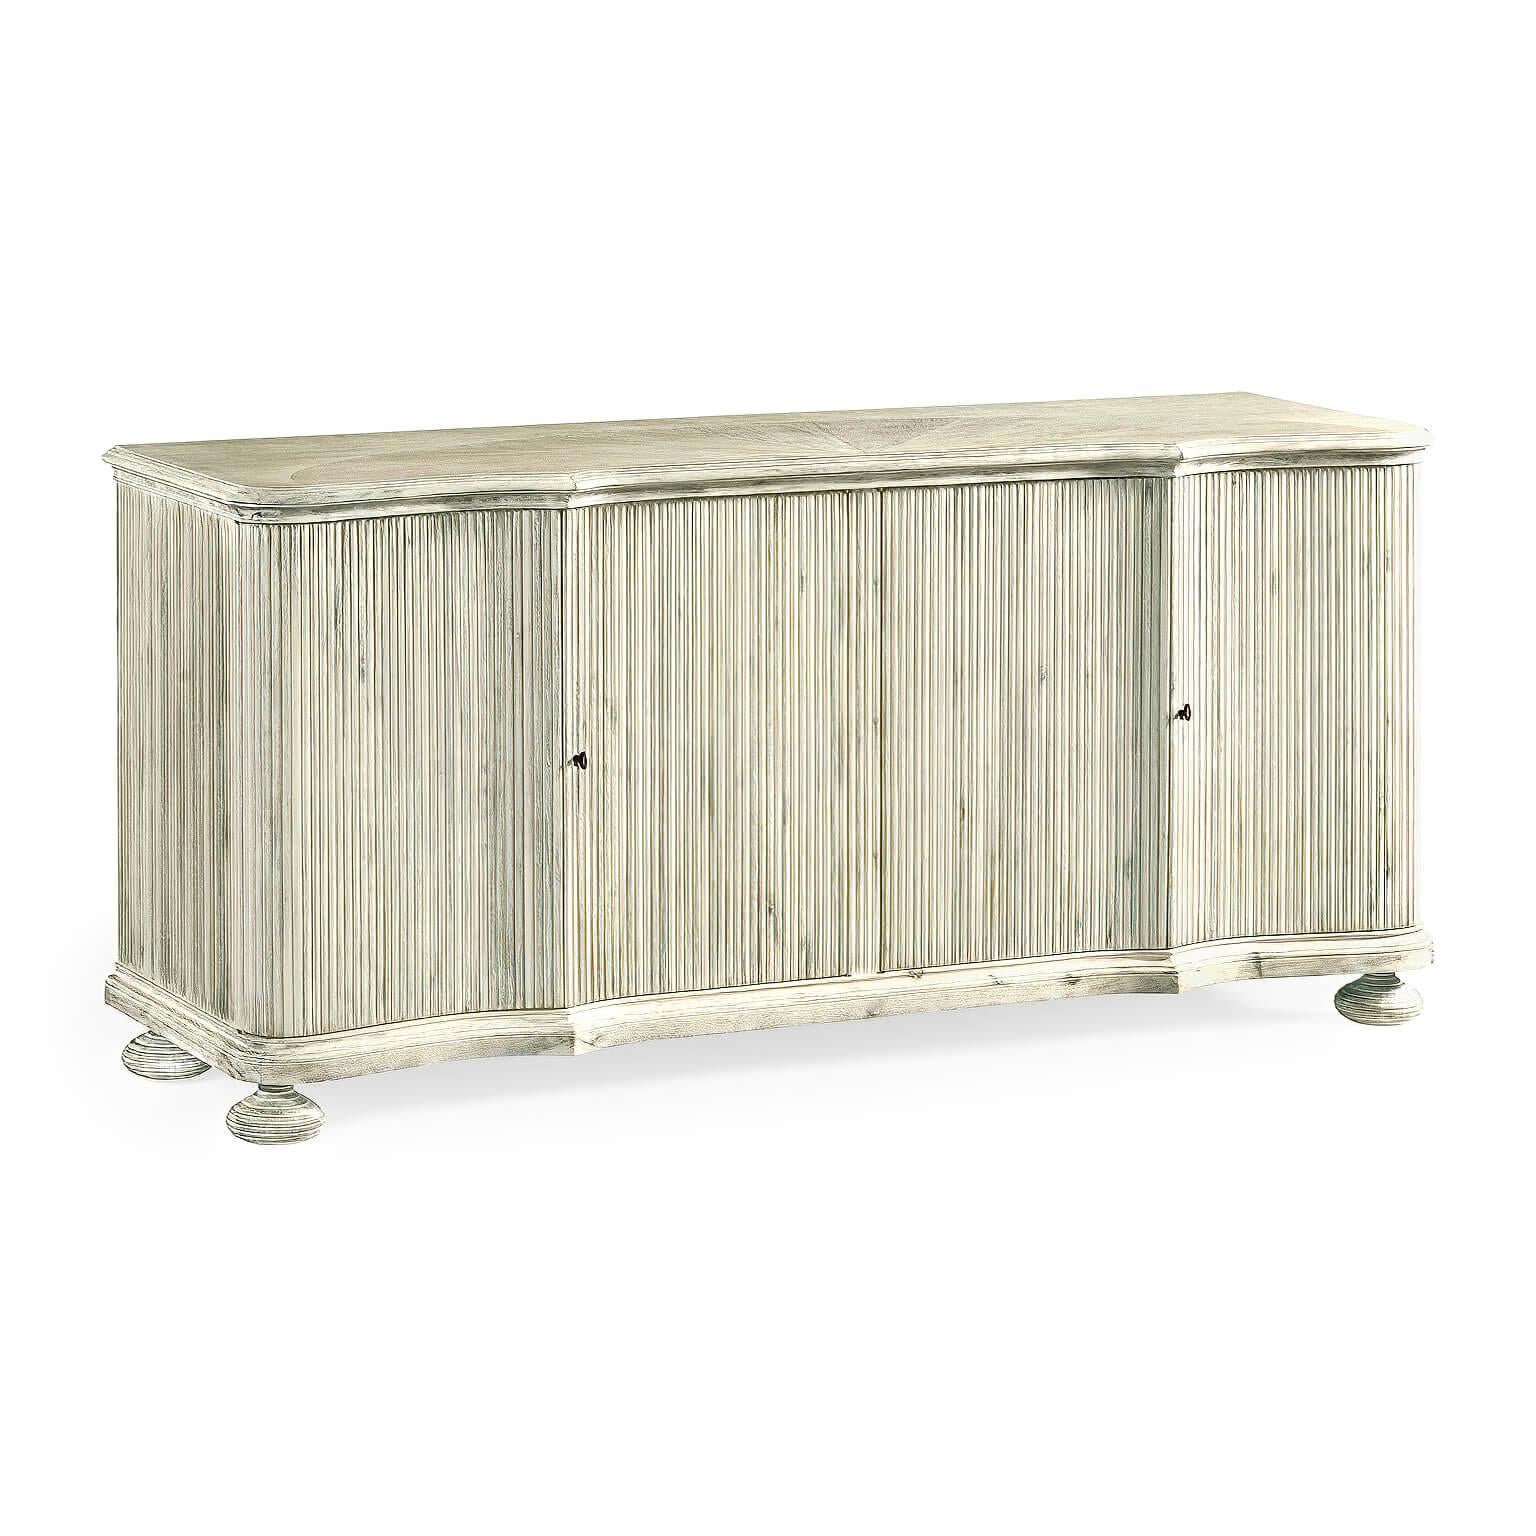 A modern whitewashed acacia buffet cabinet with reeded sides, a molded edge top, painted interior with adjustable shelves, and raised on bun feet.

Dimensions: 72.5